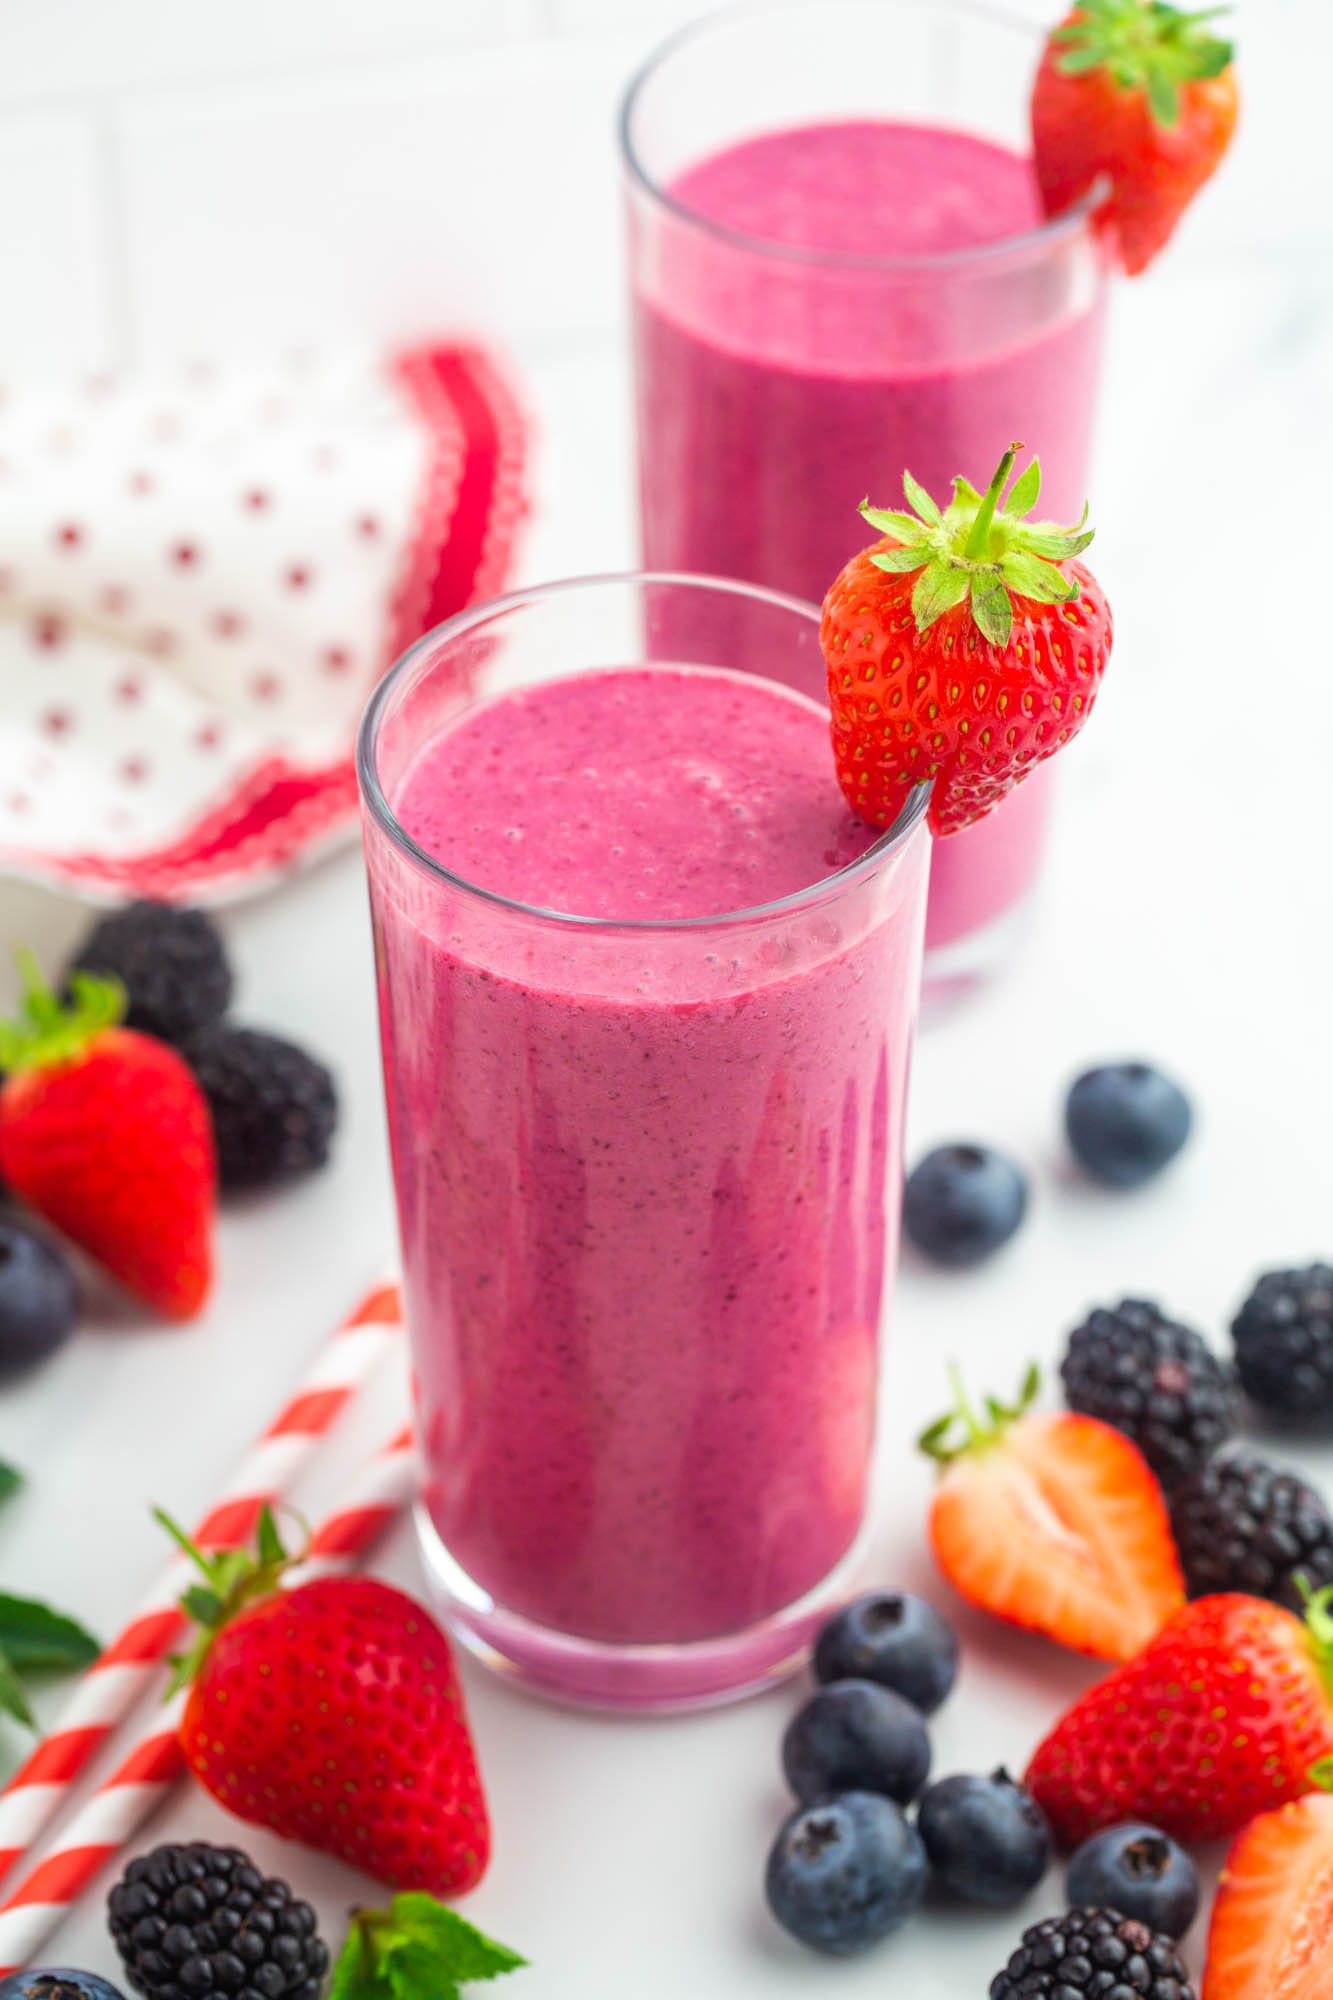 føderation Skygge Frugtbar Mixed Berry Smoothie (Healthy & Delicious!) - Little Sunny Kitchen